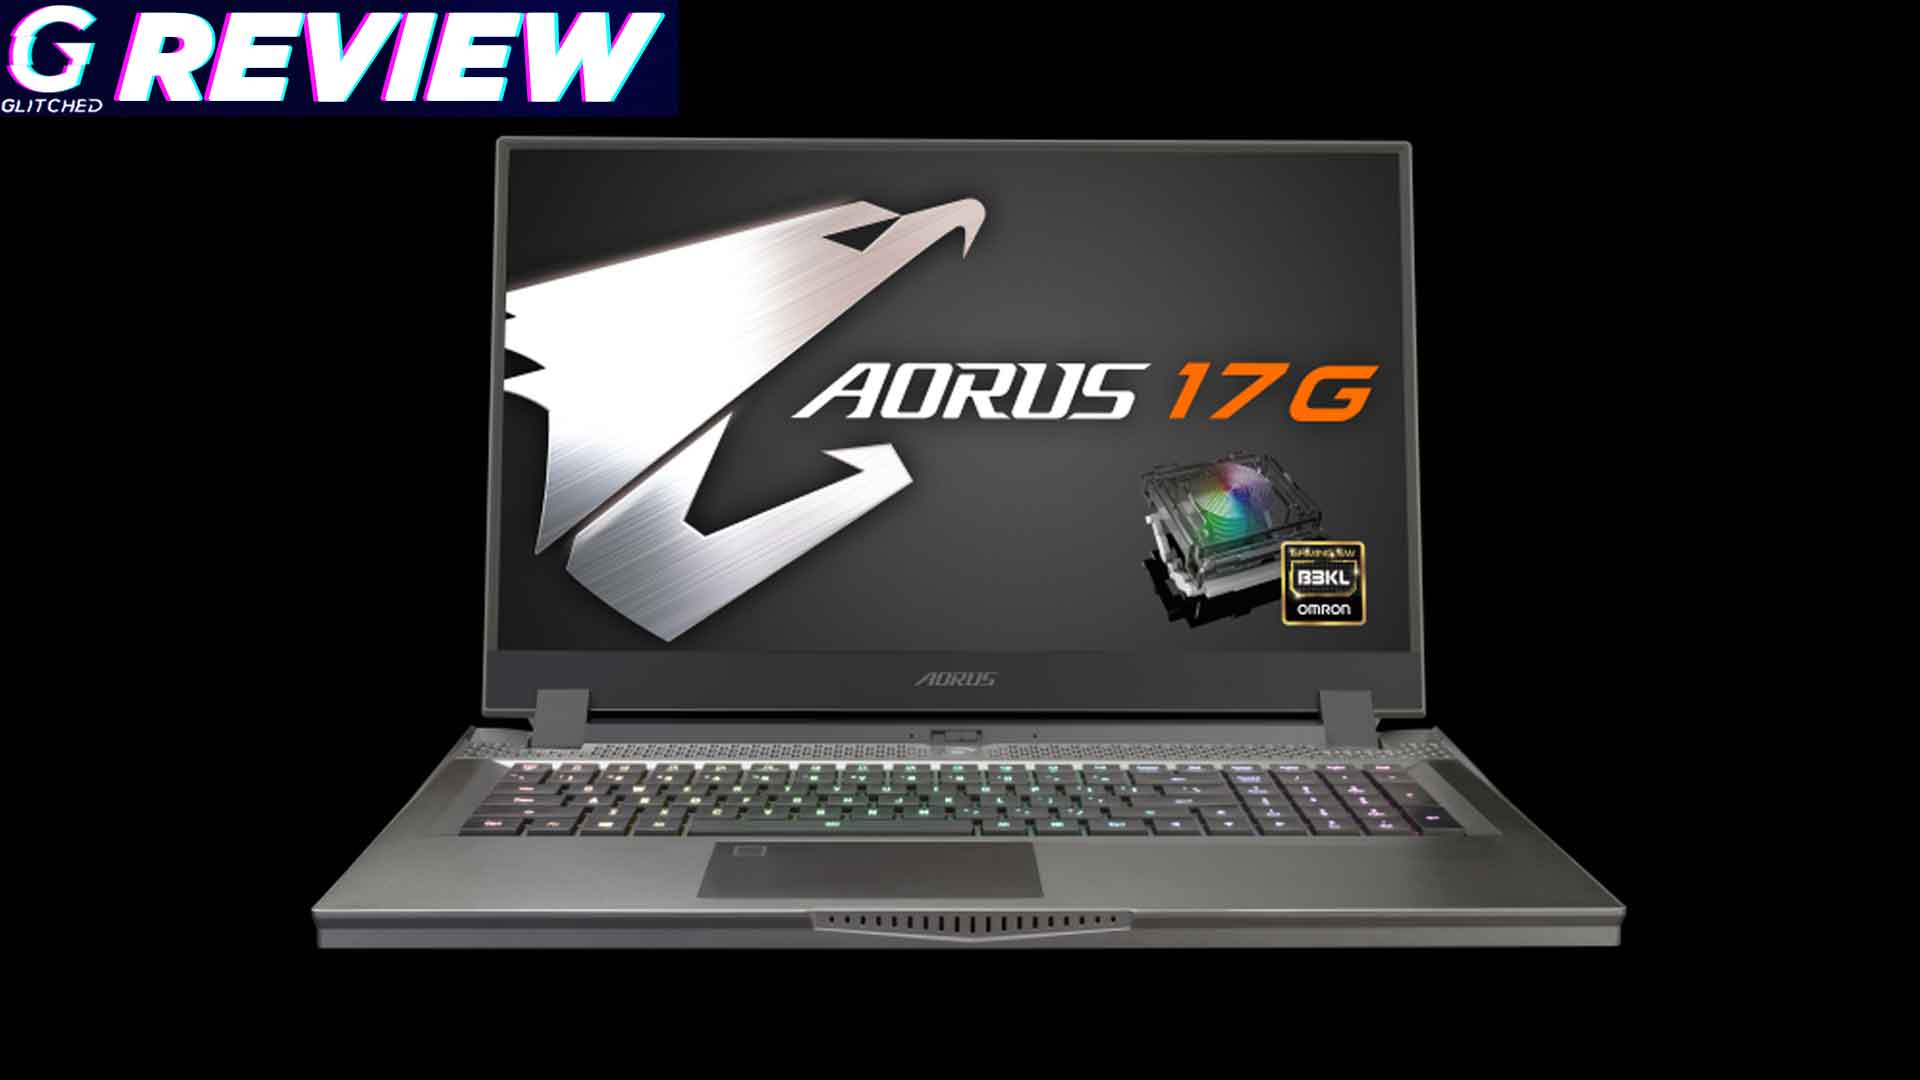 Gigabyte Aorus 17G RTX 2070 SUPER Gaming Notebook Review